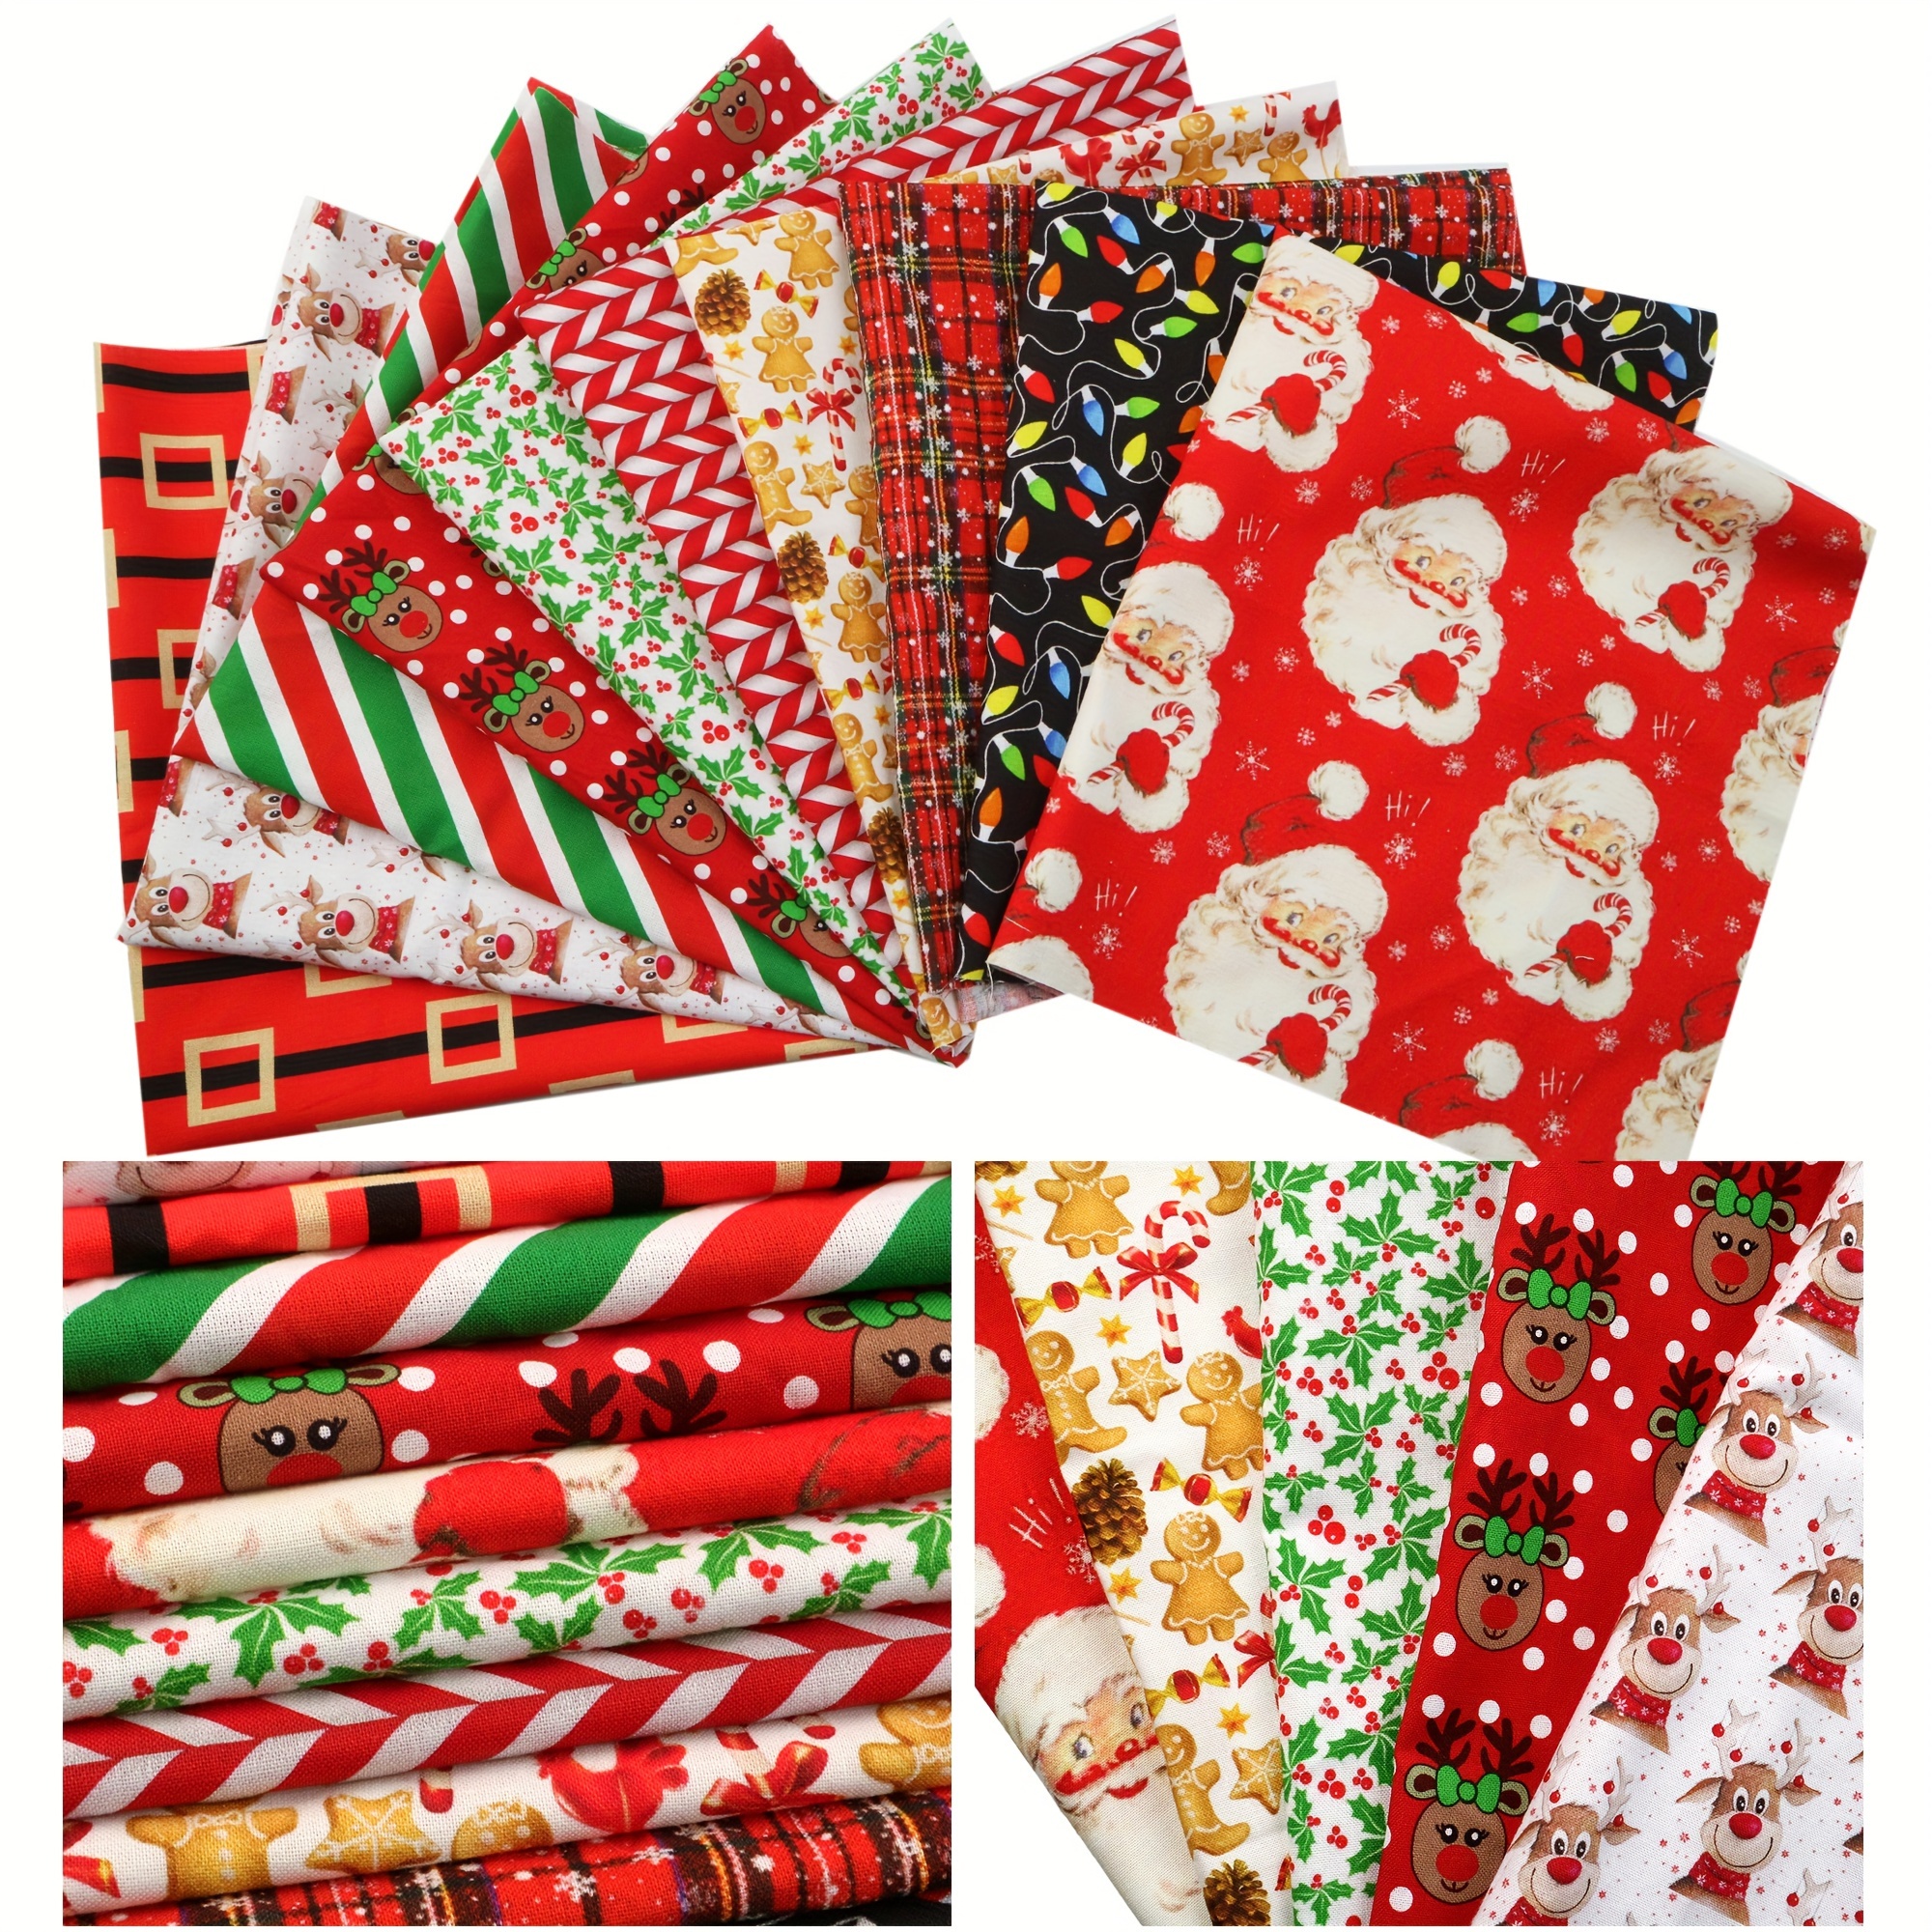 

10pcs Christmas Themed Polyester Cotton Fabric Set, 7.87x7.87inch Precut Quilting Squares, Hand Wash Only, No Repeat Patterns For Diy Sewing & Crafting (108gsm)